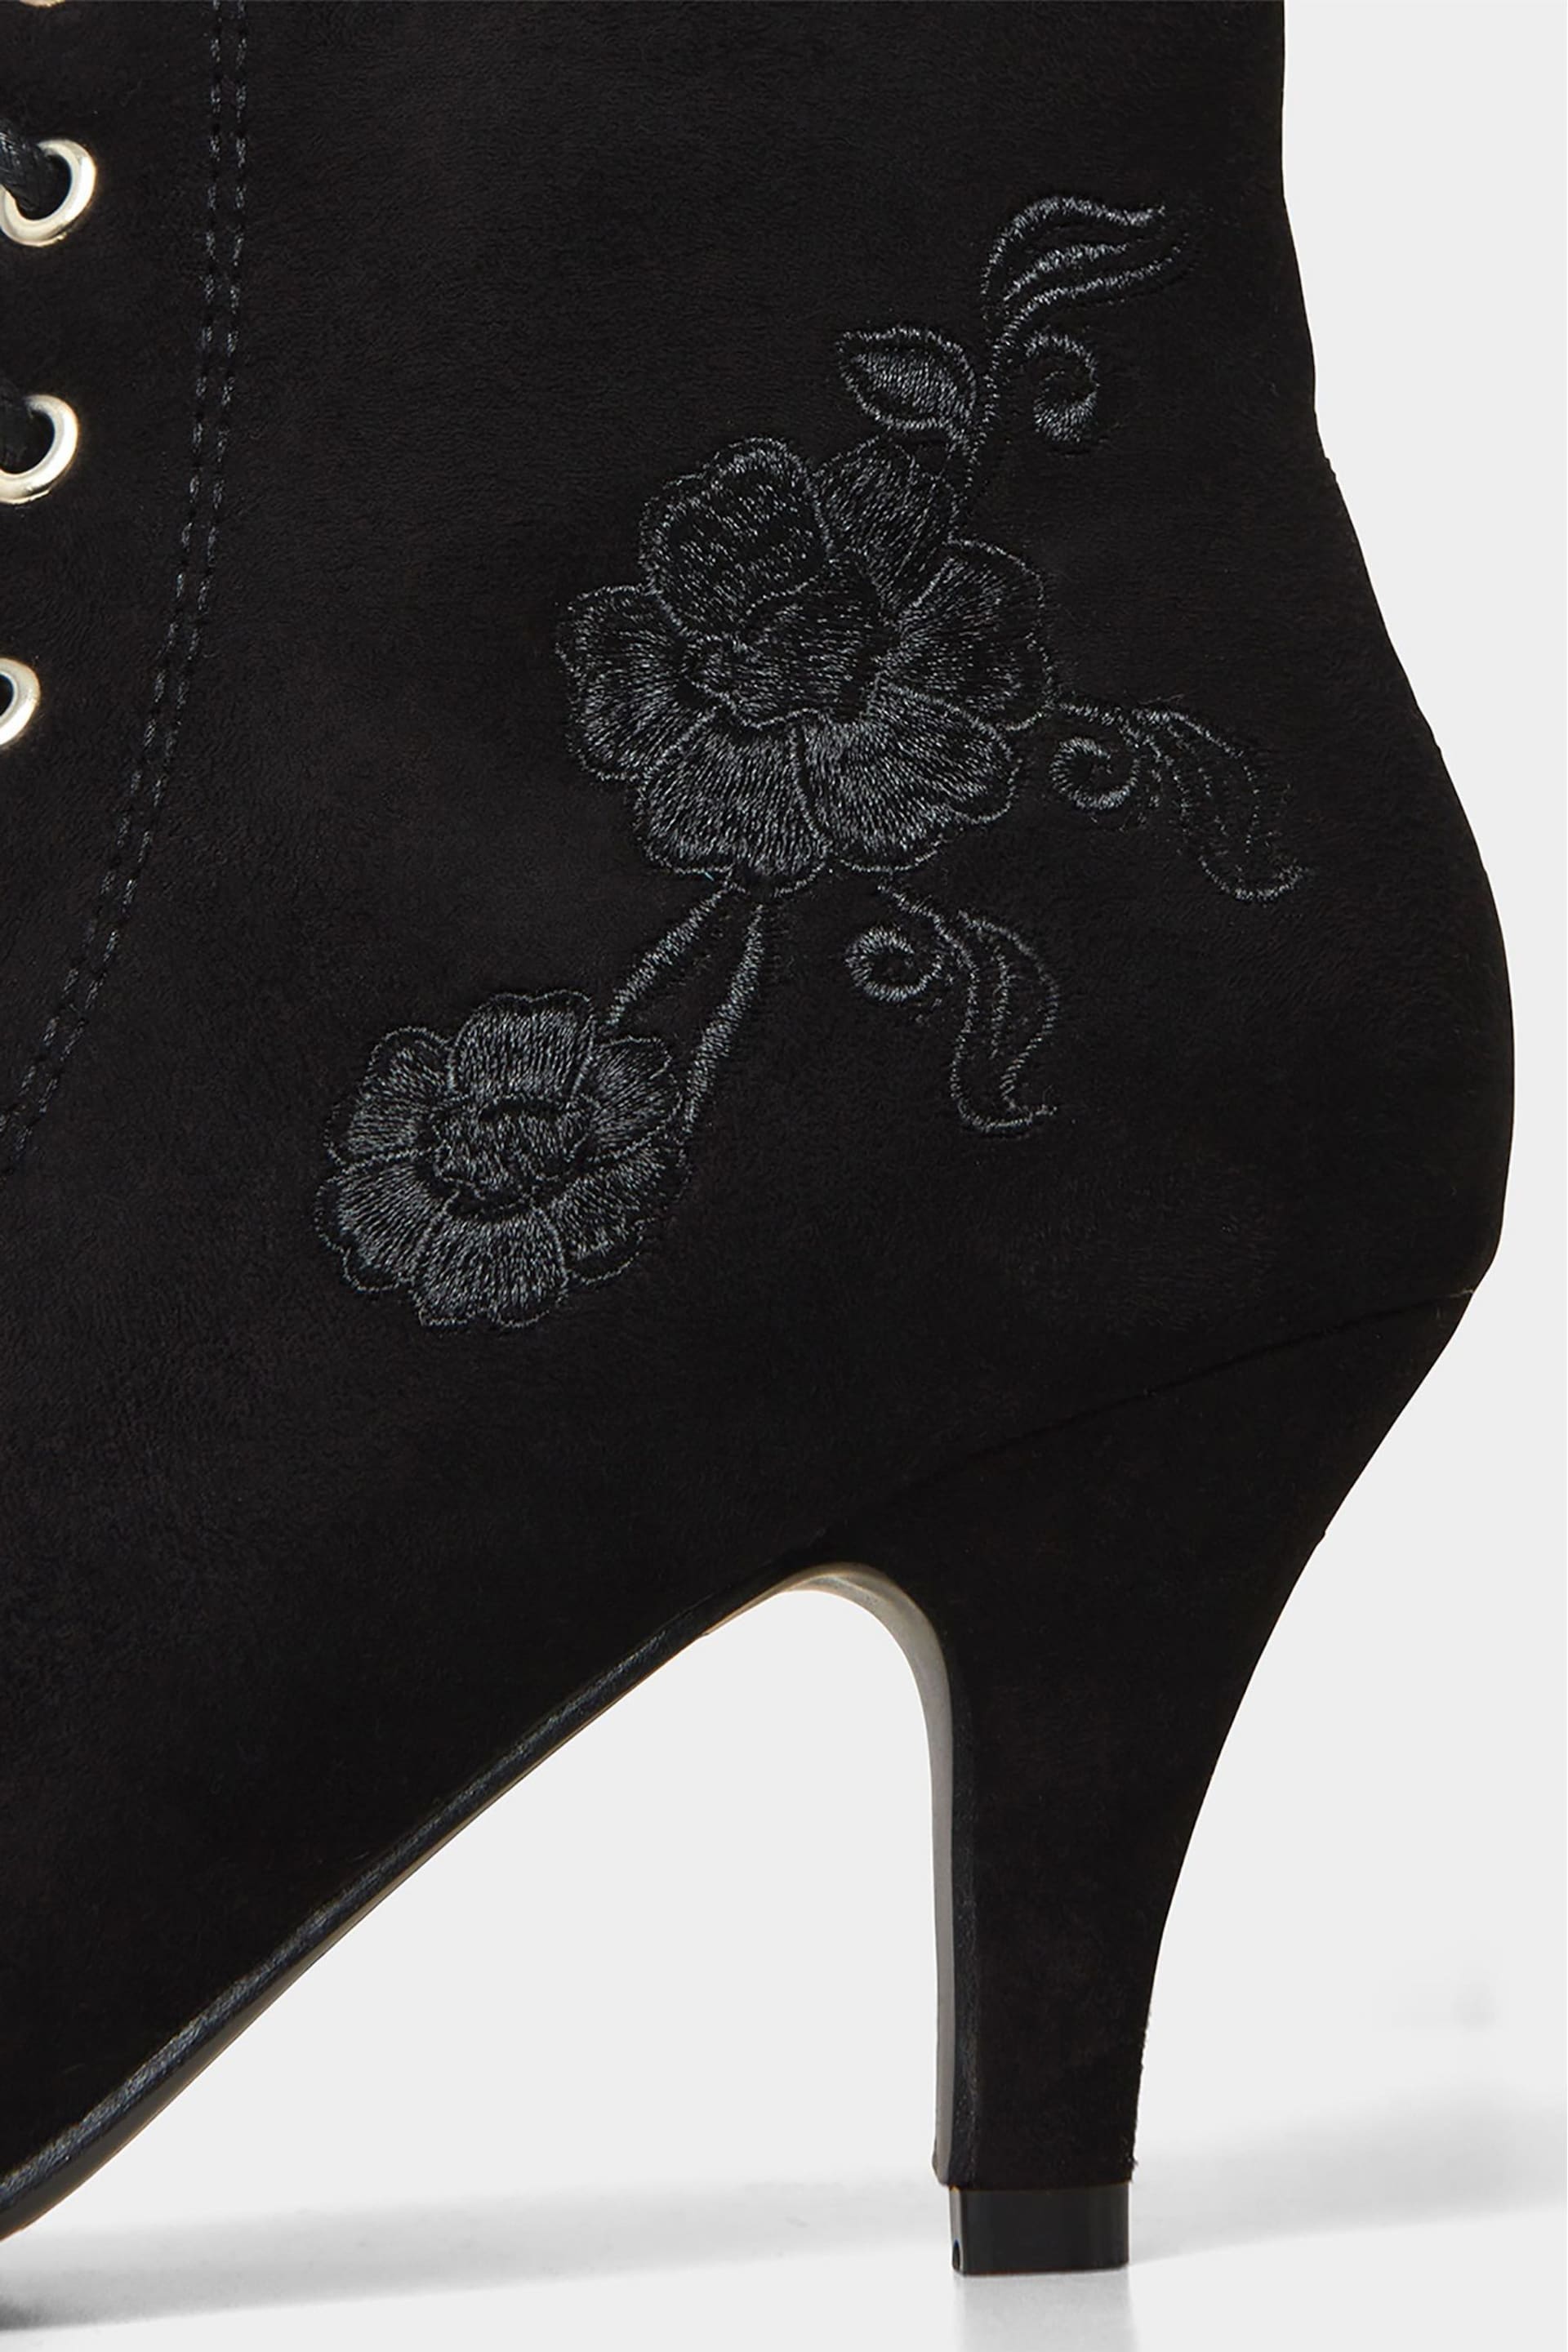 Joe Browns Black Floral Embroidered Heeled Lace Up Boots - Image 5 of 5